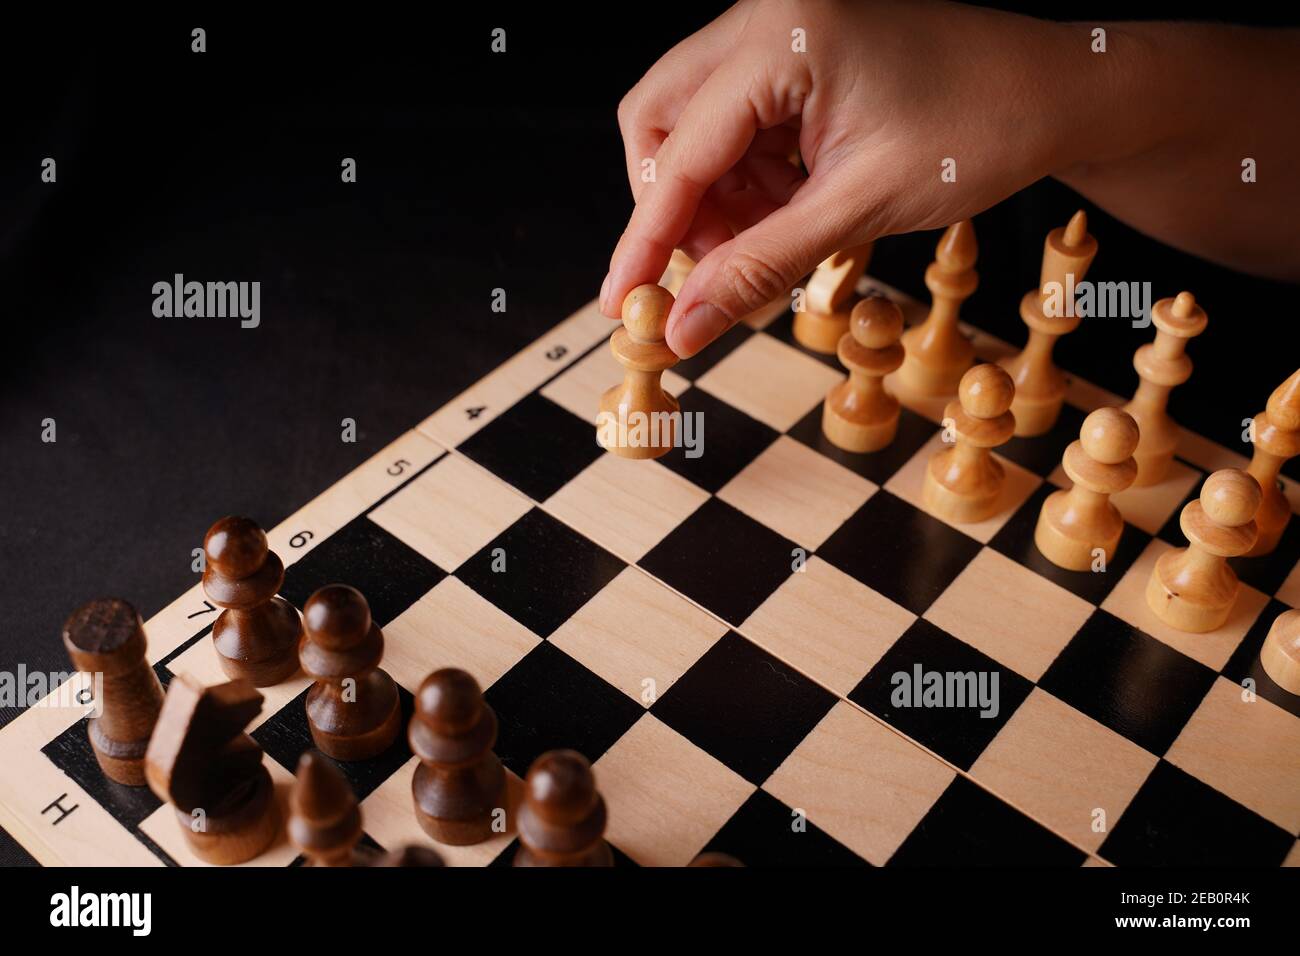 Close up of white and black wooden chess pieces on board. Woman's hand makes first move of white pawn on chessboard. Concept of intelligent, logical a Stock Photo